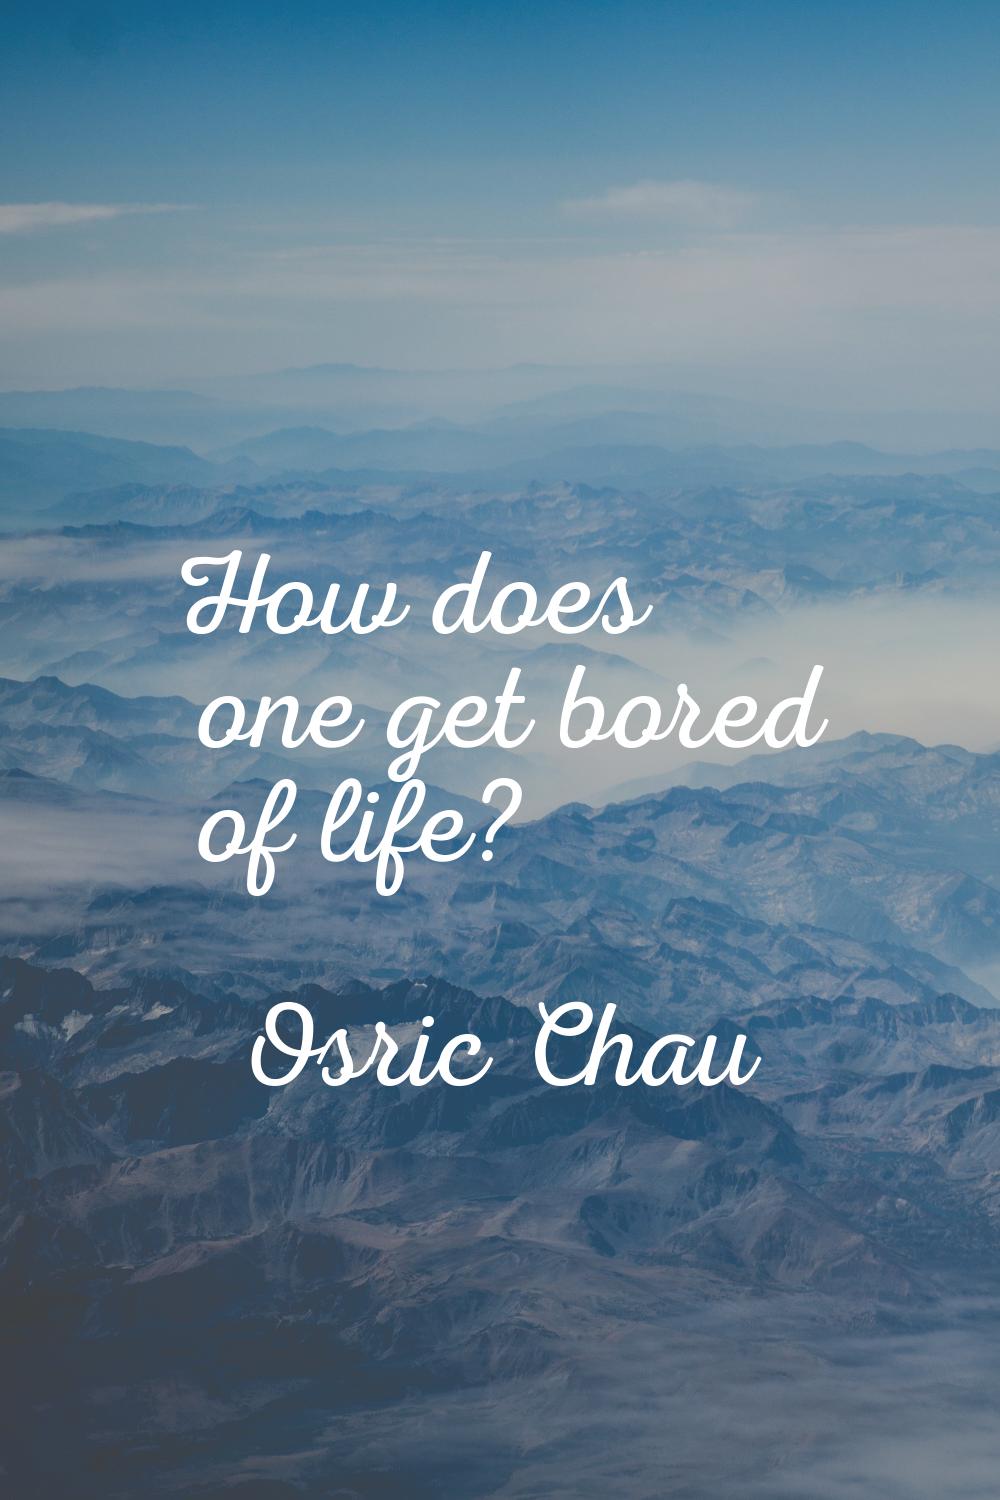 How does one get bored of life?